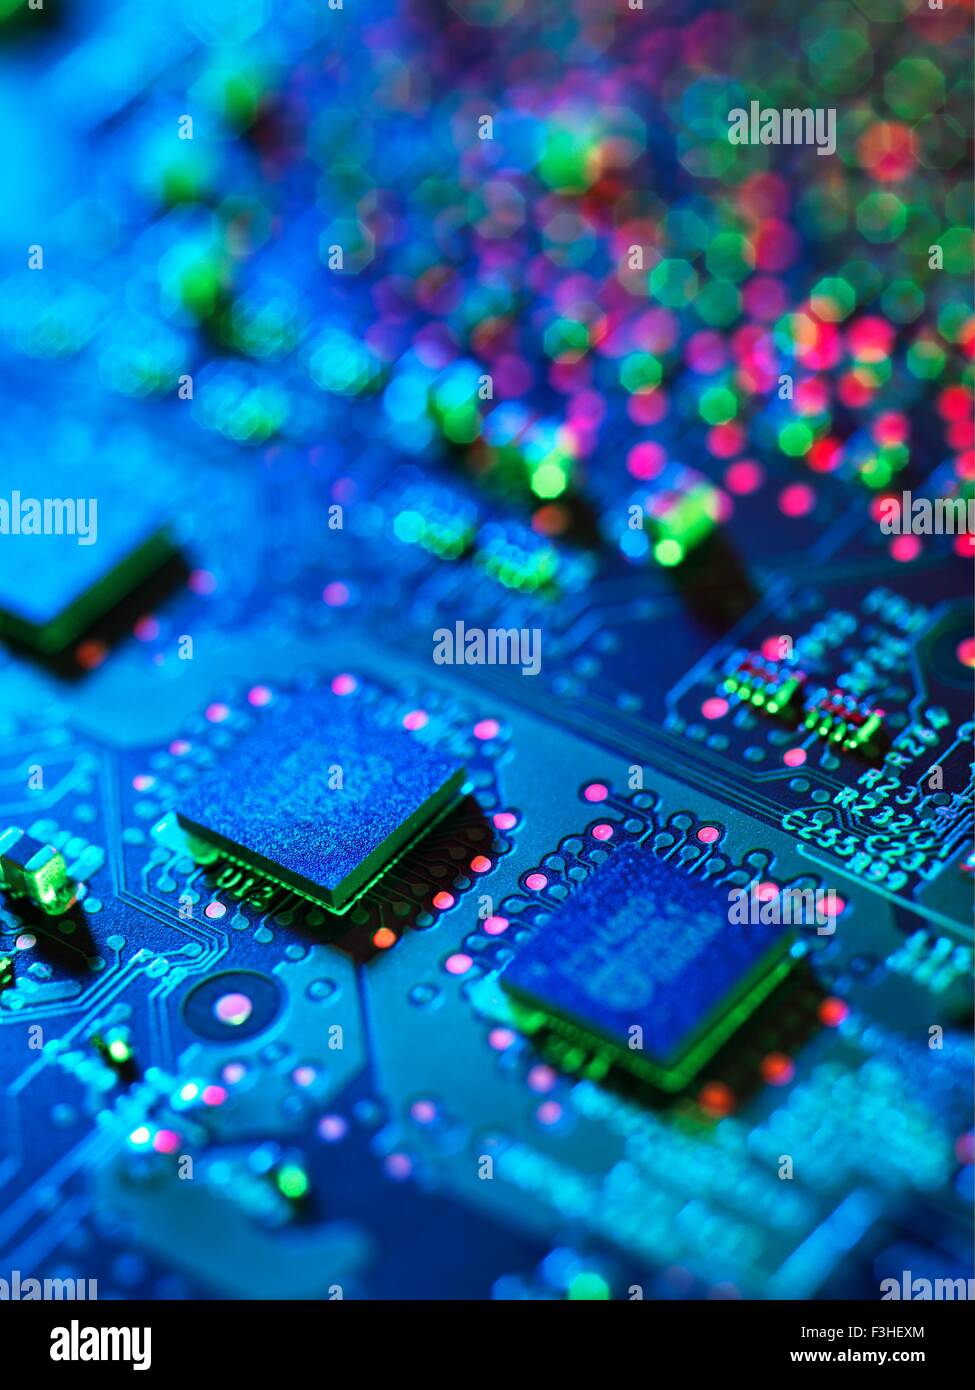 Close up detail of blue computer circuit board Stock Photo